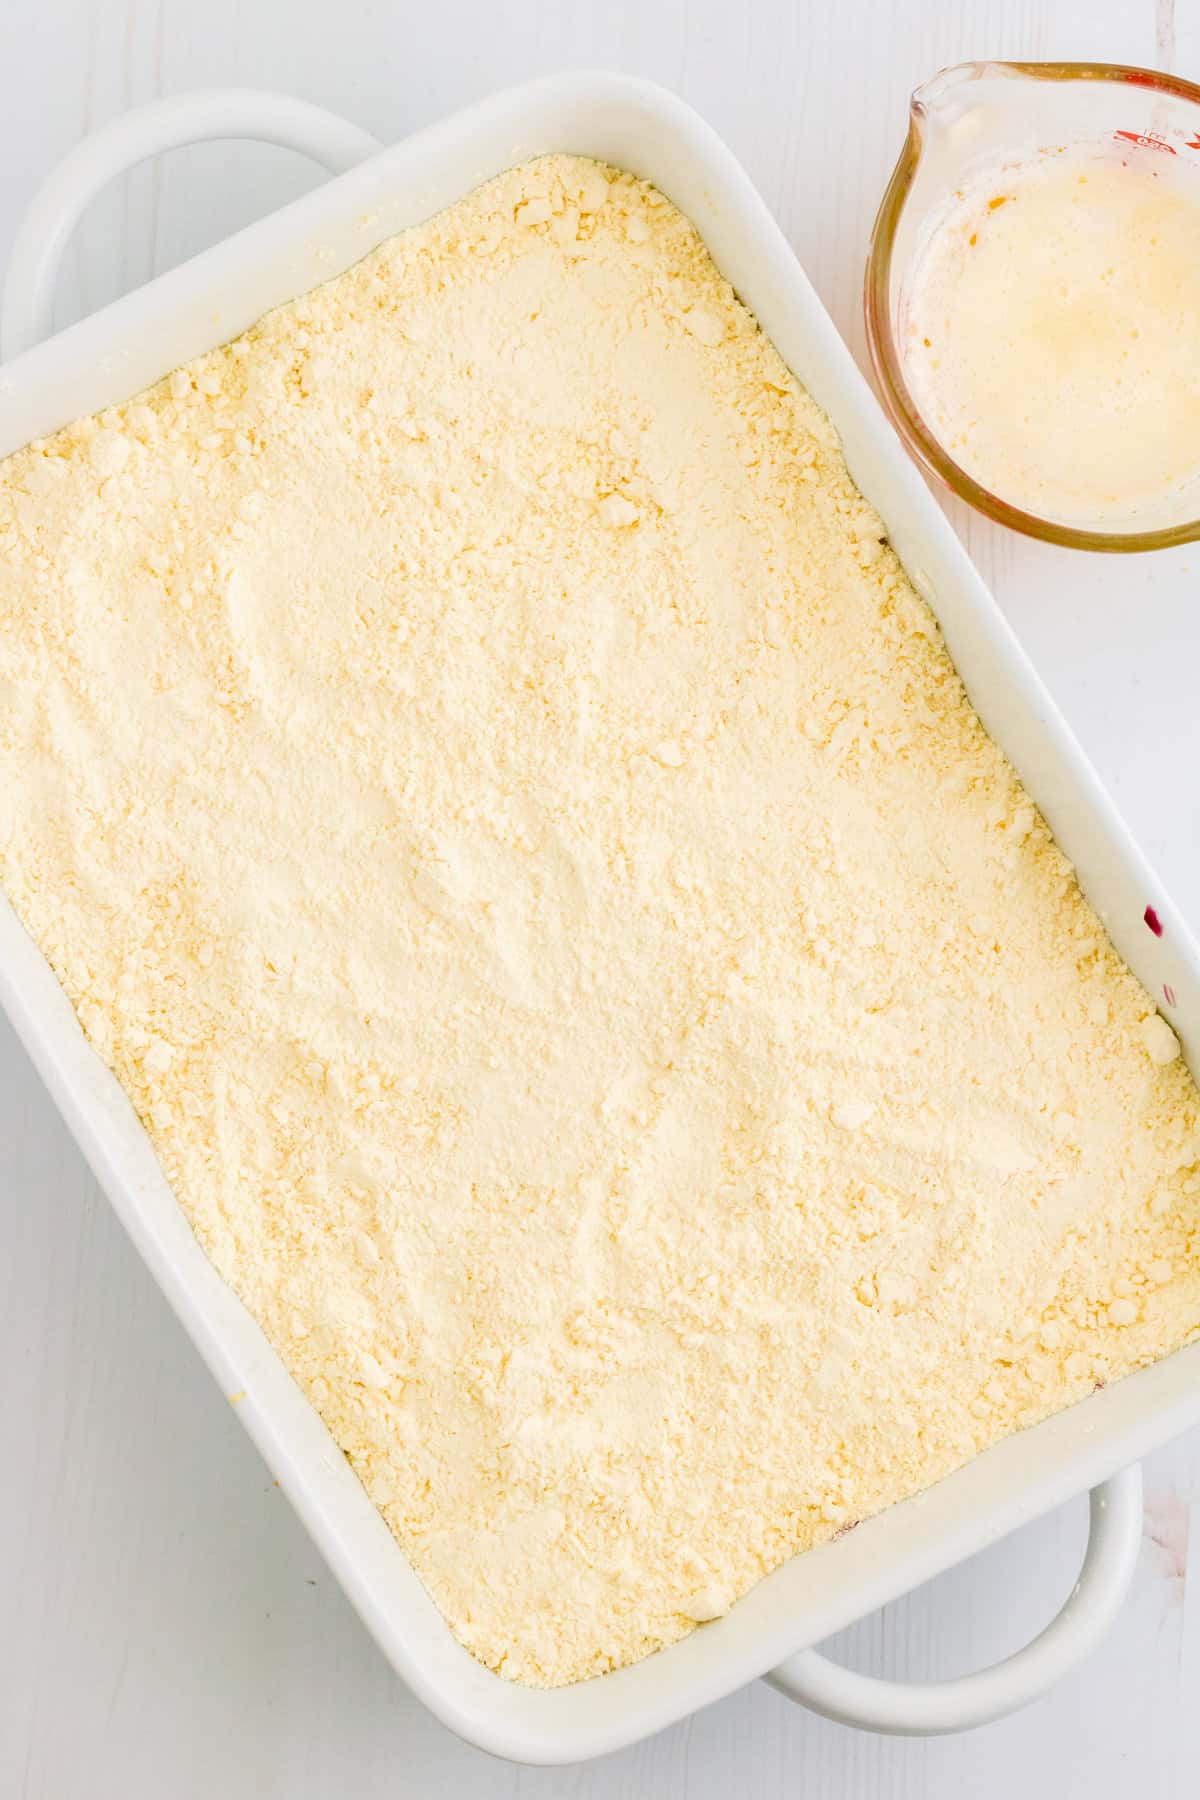 The pie filling in the dish has been completely covered with dry lemon cake mix.